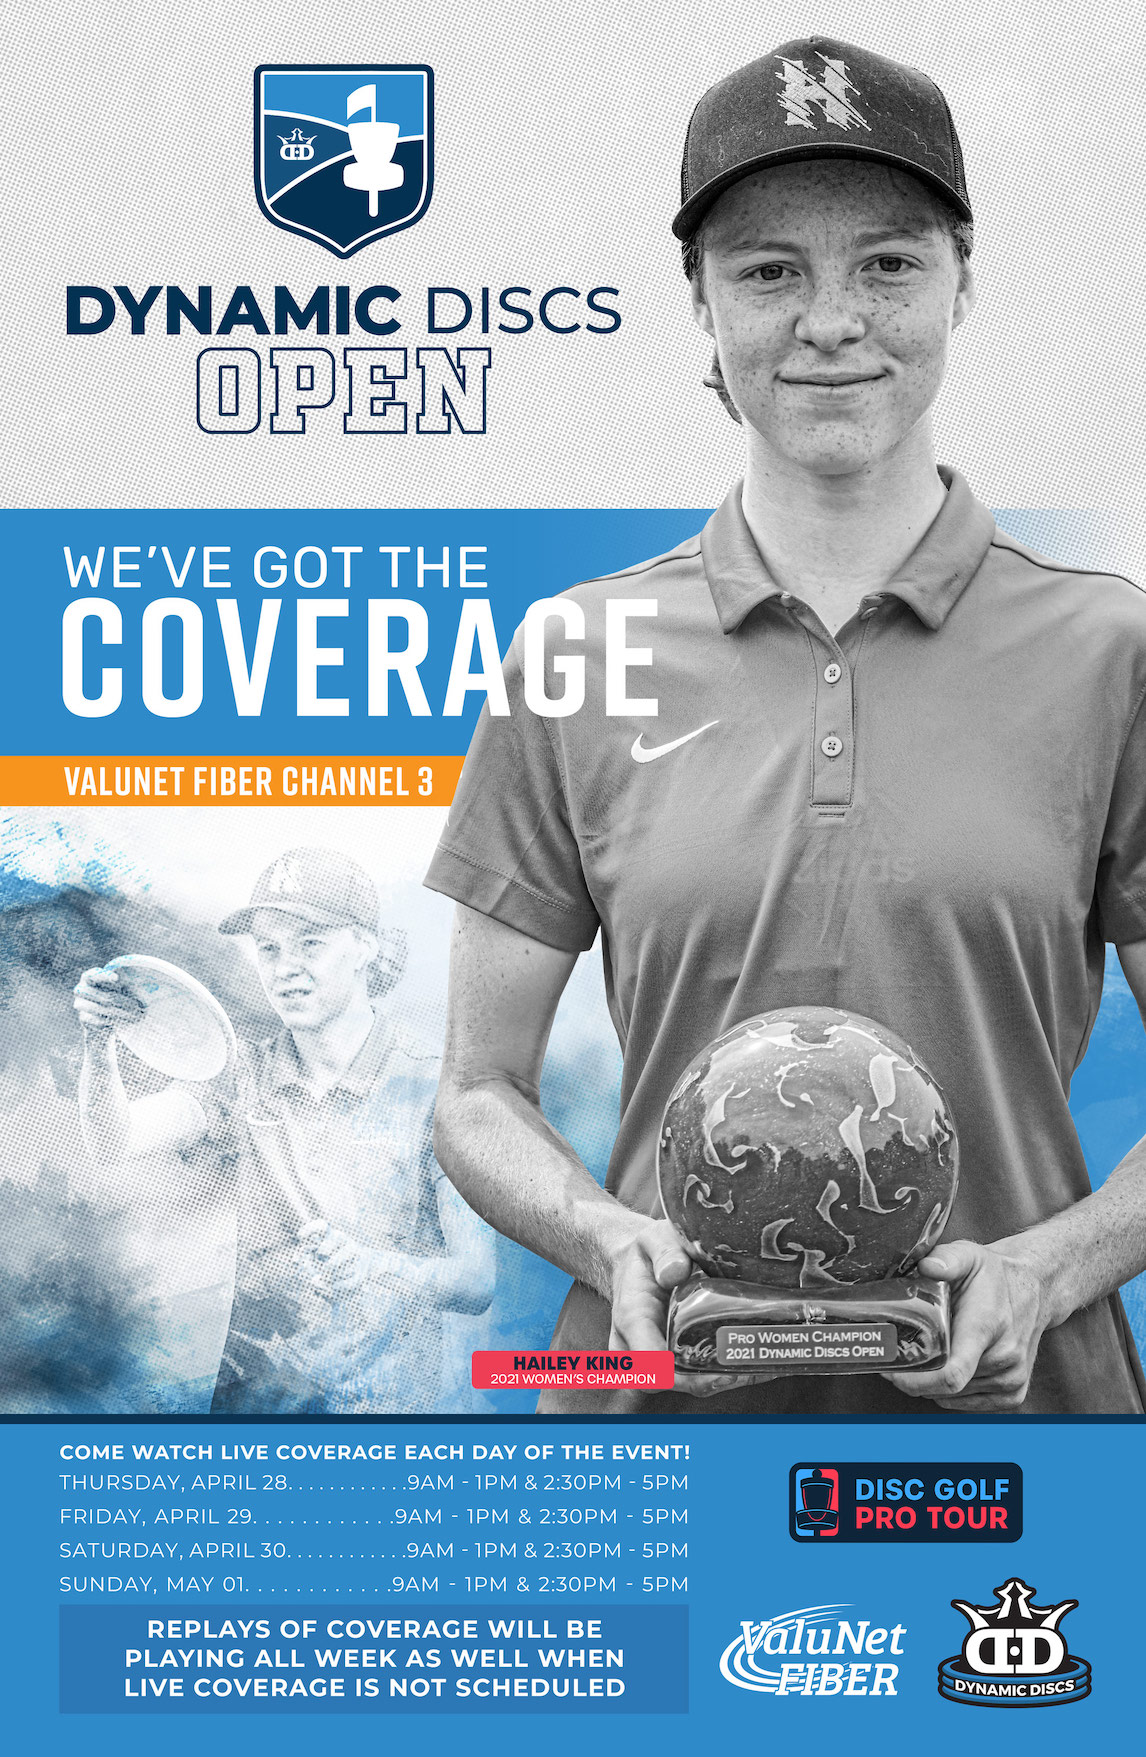 Dynamic Discs Open Coverage - Download Graphics to View